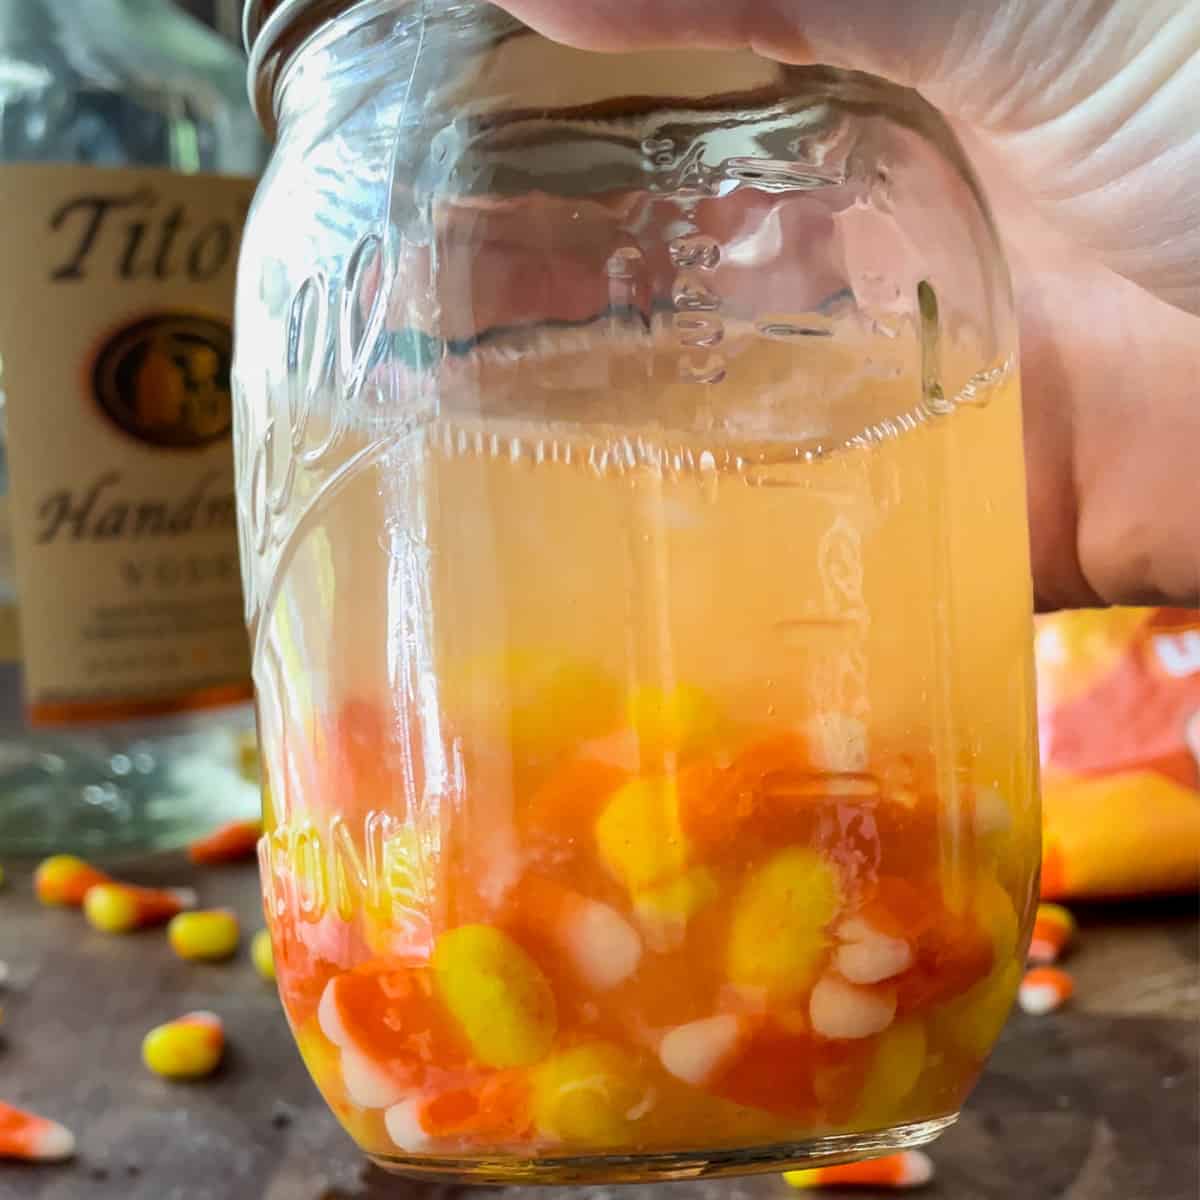 partially dissolved candy corn in vodka